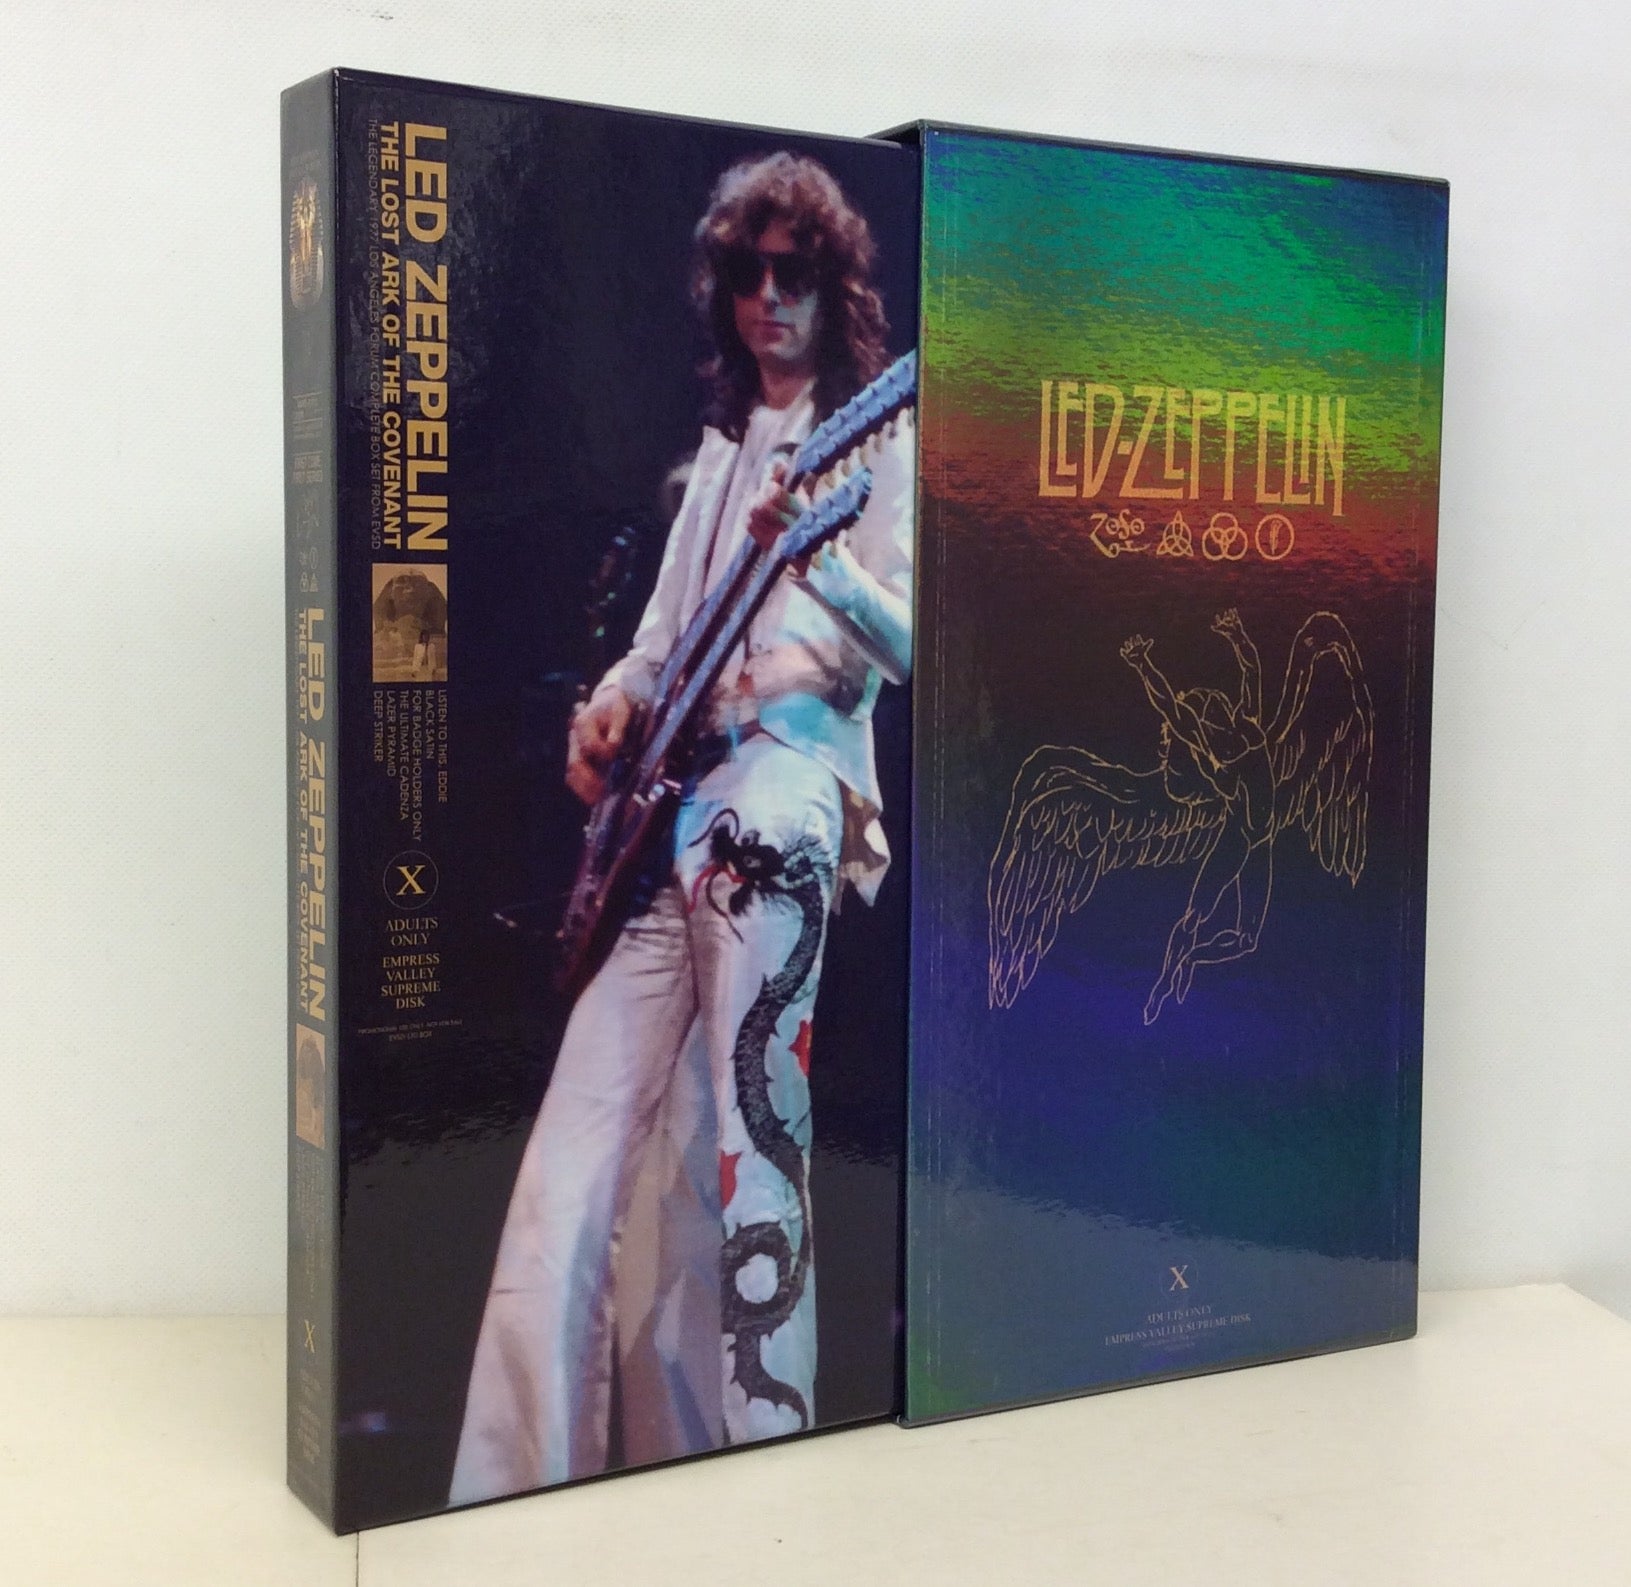 LED ZEPPELIN EMPRESS VALLEY BOX | 西新宿レコード店 Red Ring 